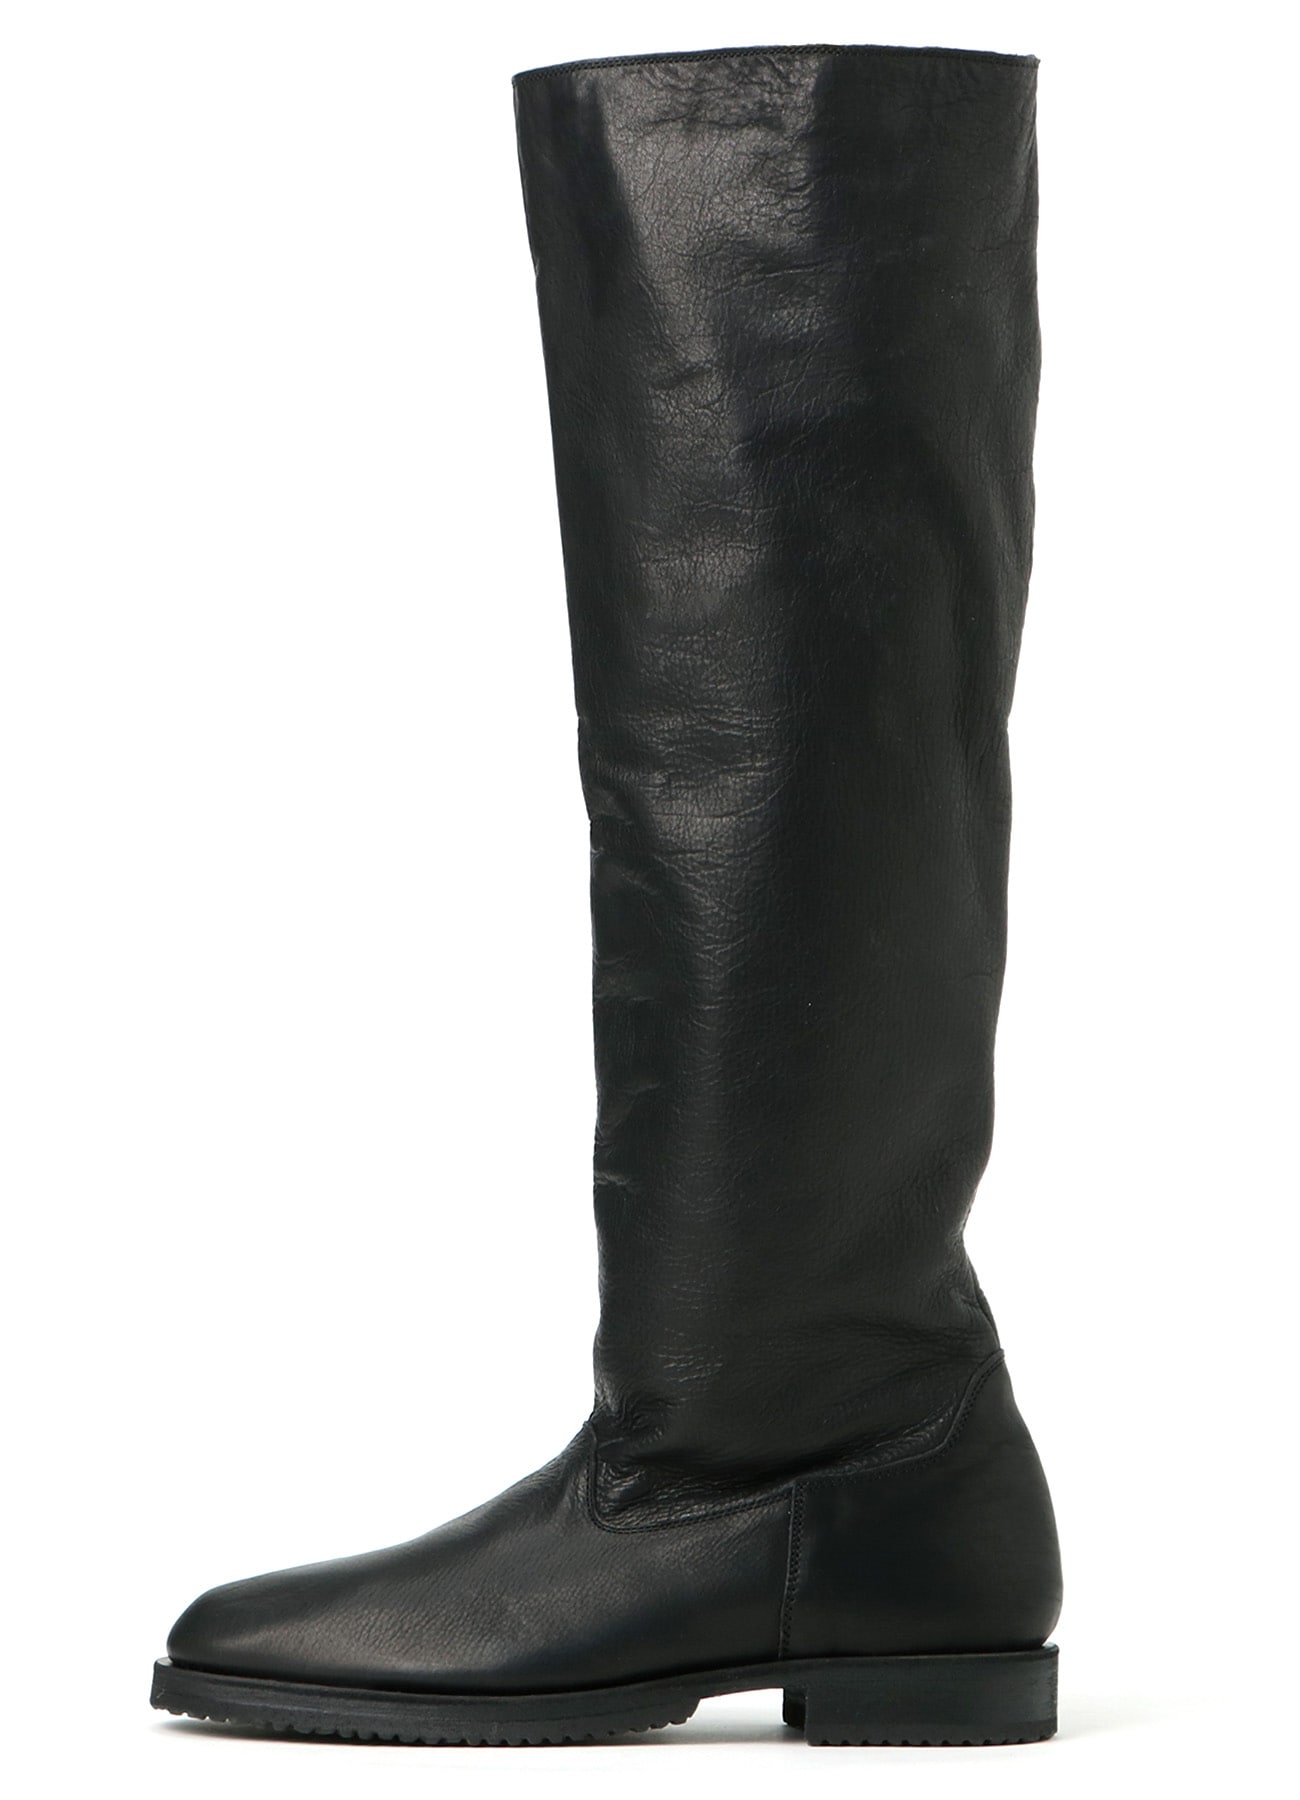 SOFT OILED LEATHER KNEE-HIGH BOOTS(26 Black): Vintage｜THE SHOP 